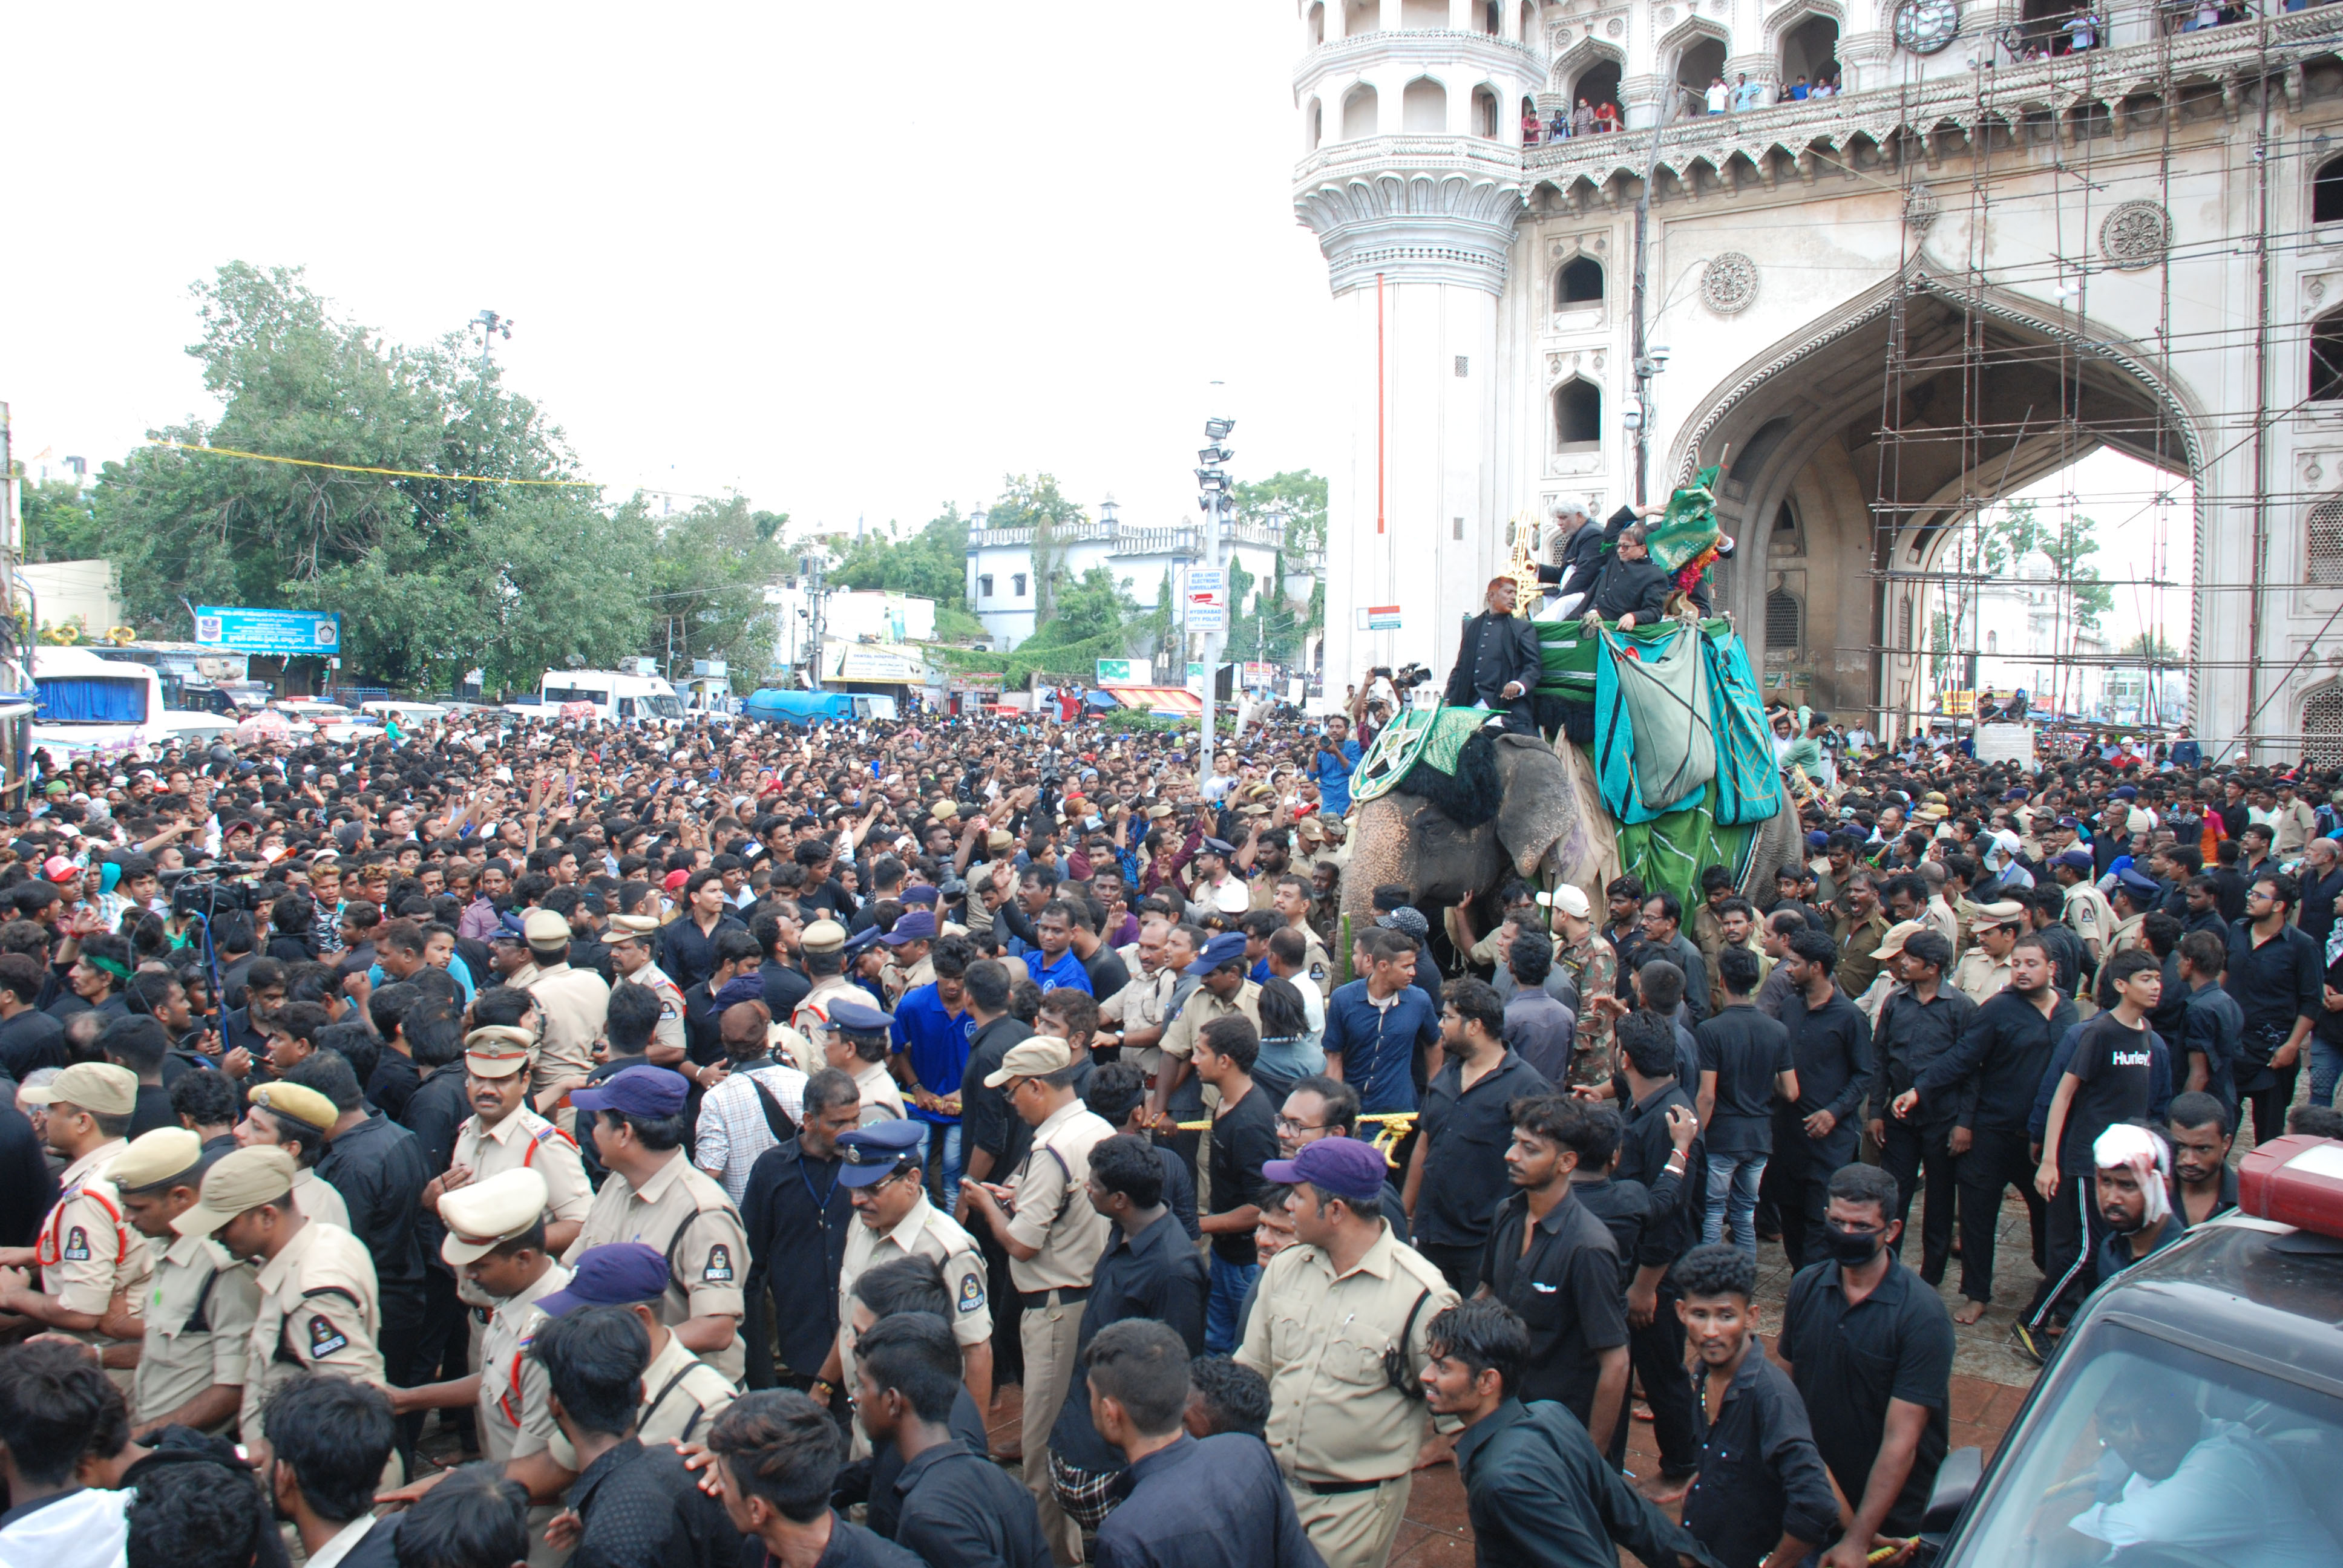 The Bibi ka Alam procession begins in Hyderabad’s Old City.